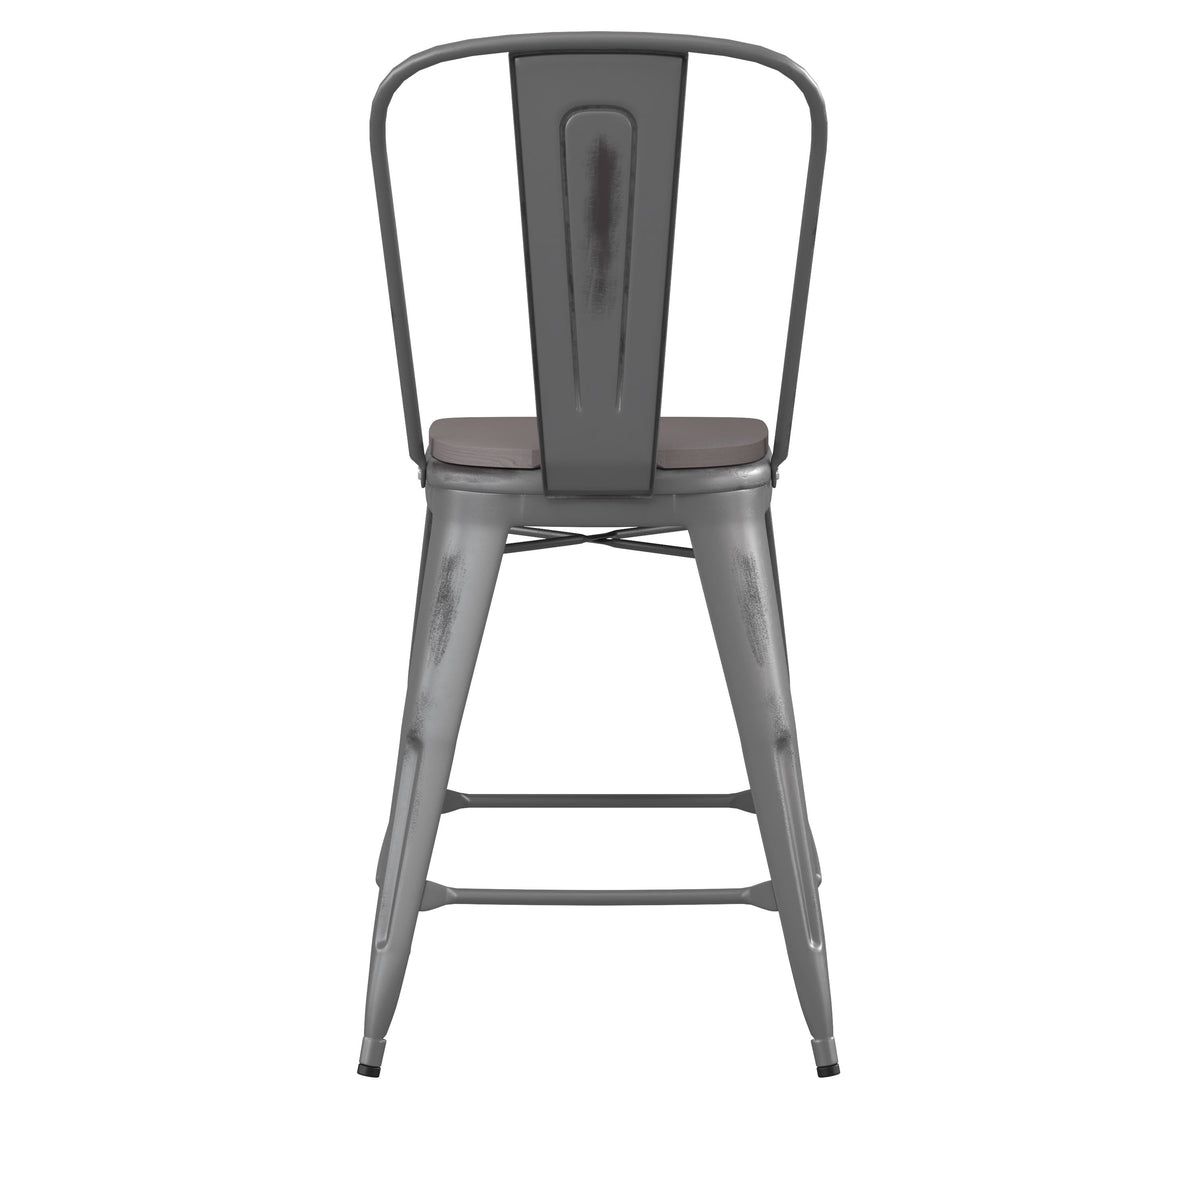 Silver Gray/Gray |#| All-Weather Counter Height Stool with Poly Resin Seat - Silver/Gray